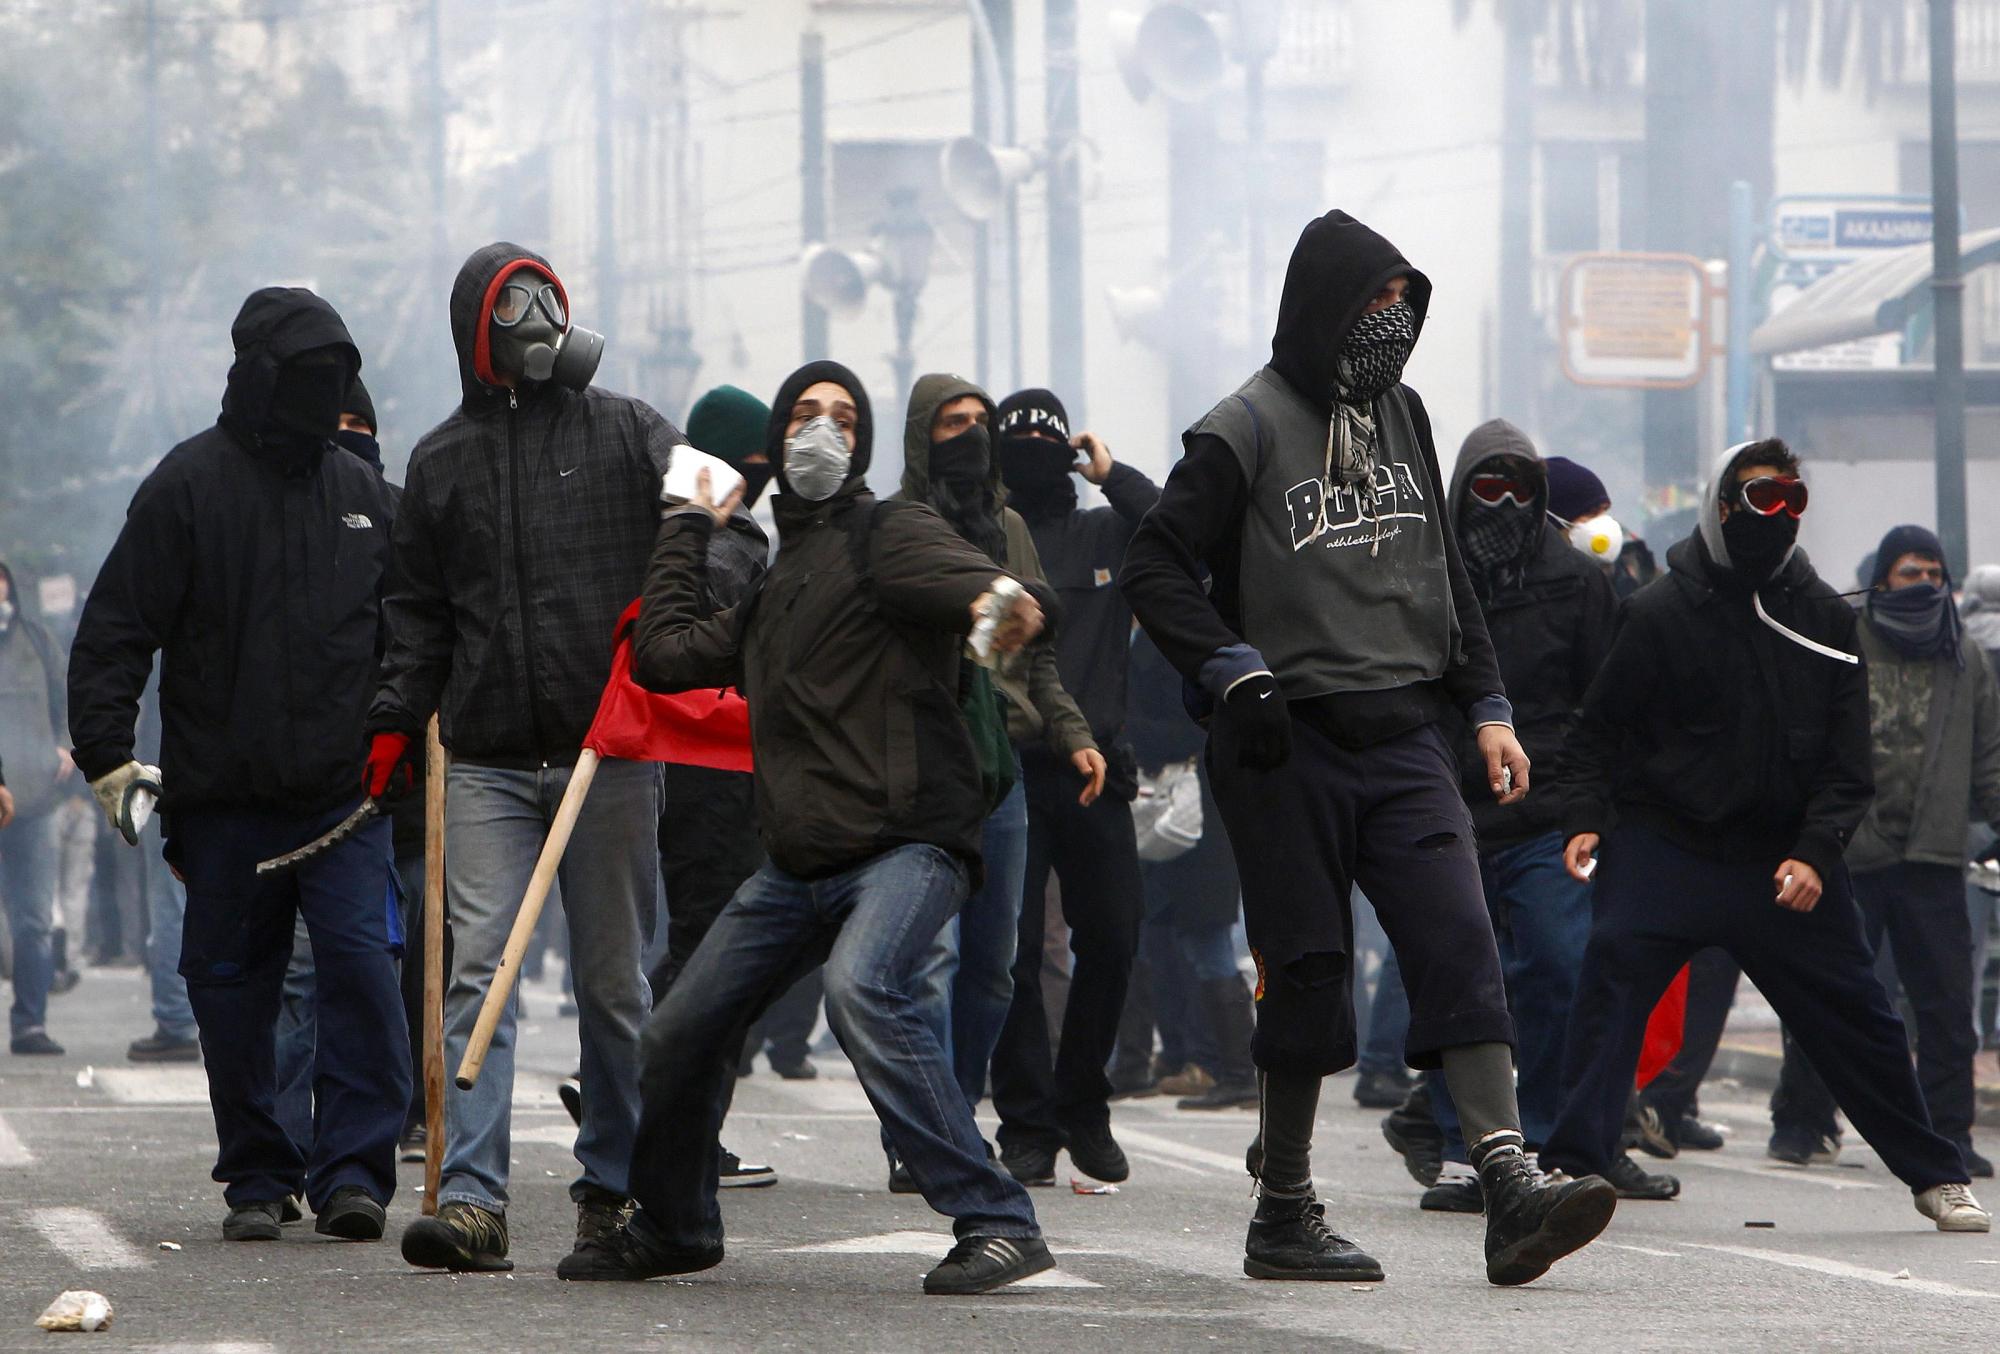 Greek protests against austerity measures escalate